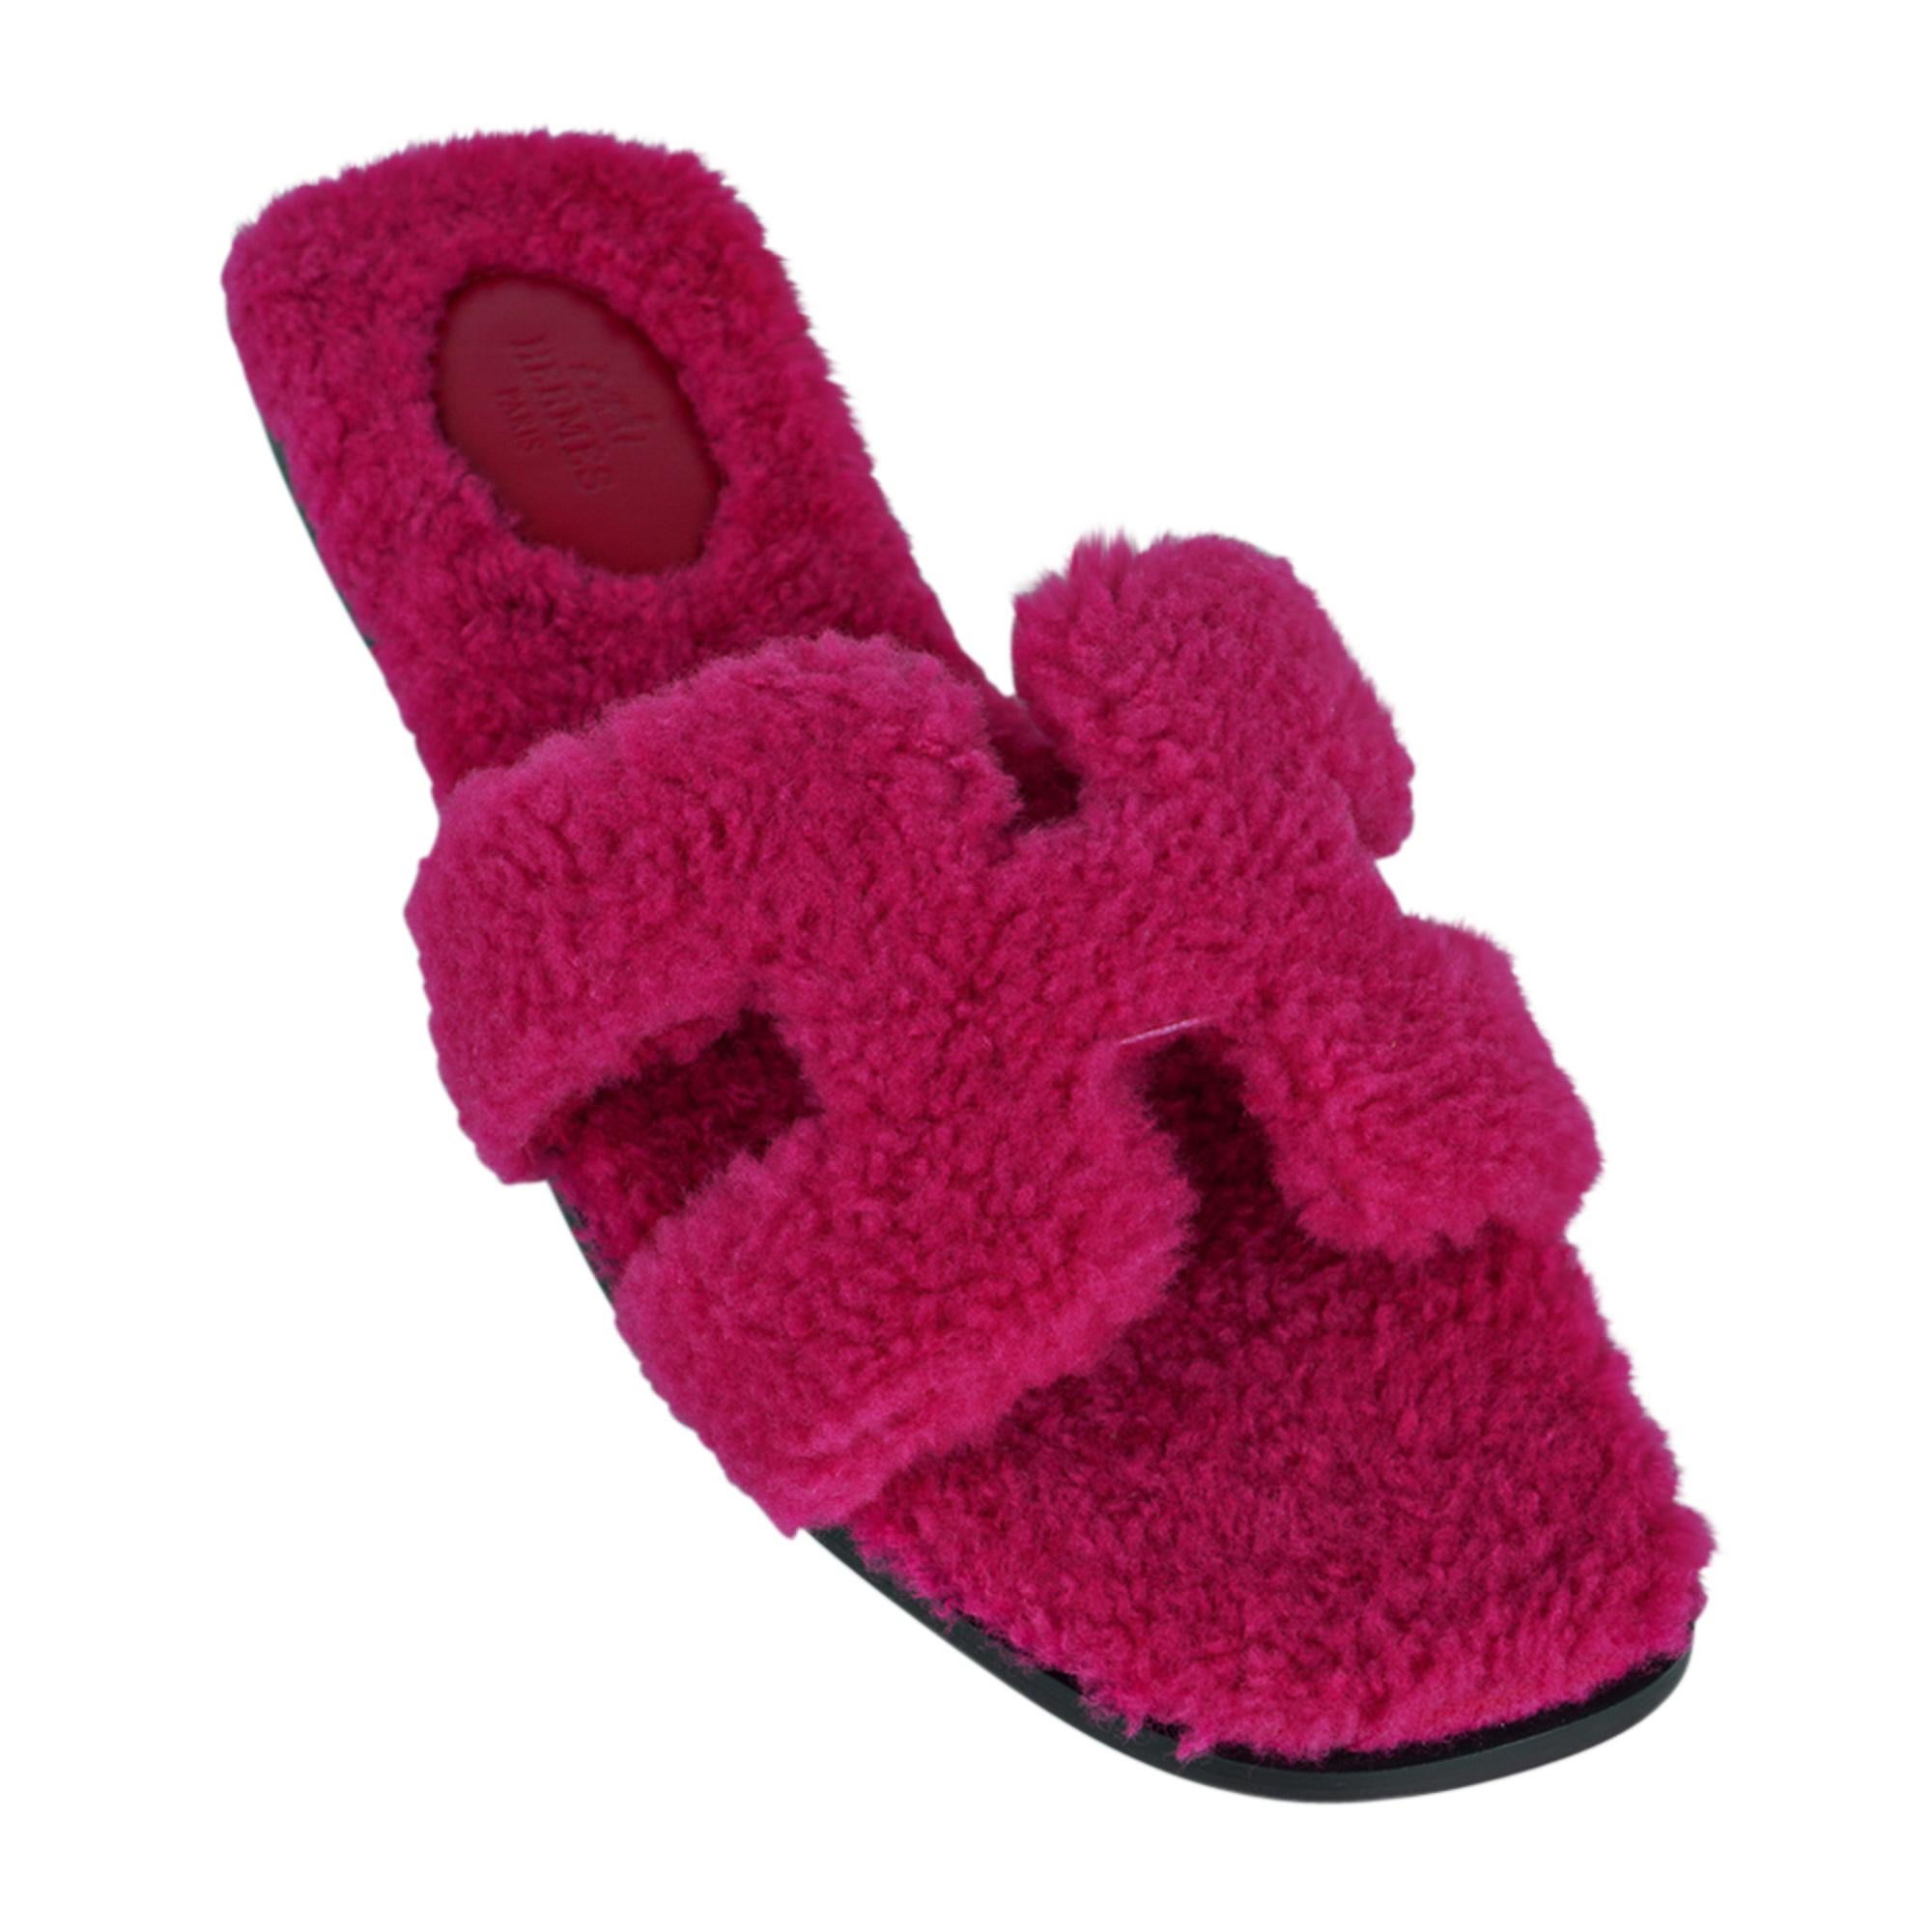 Mightychic offers a guaranteed authentic Hermes Oran Teddy Bear Rose Shearling limited edition flat sandal slide.
Featured in saturated Fuchsia this limited edition Hermes Oran sandal is foot flirting perfection!
Embossed Hermes Paris leather